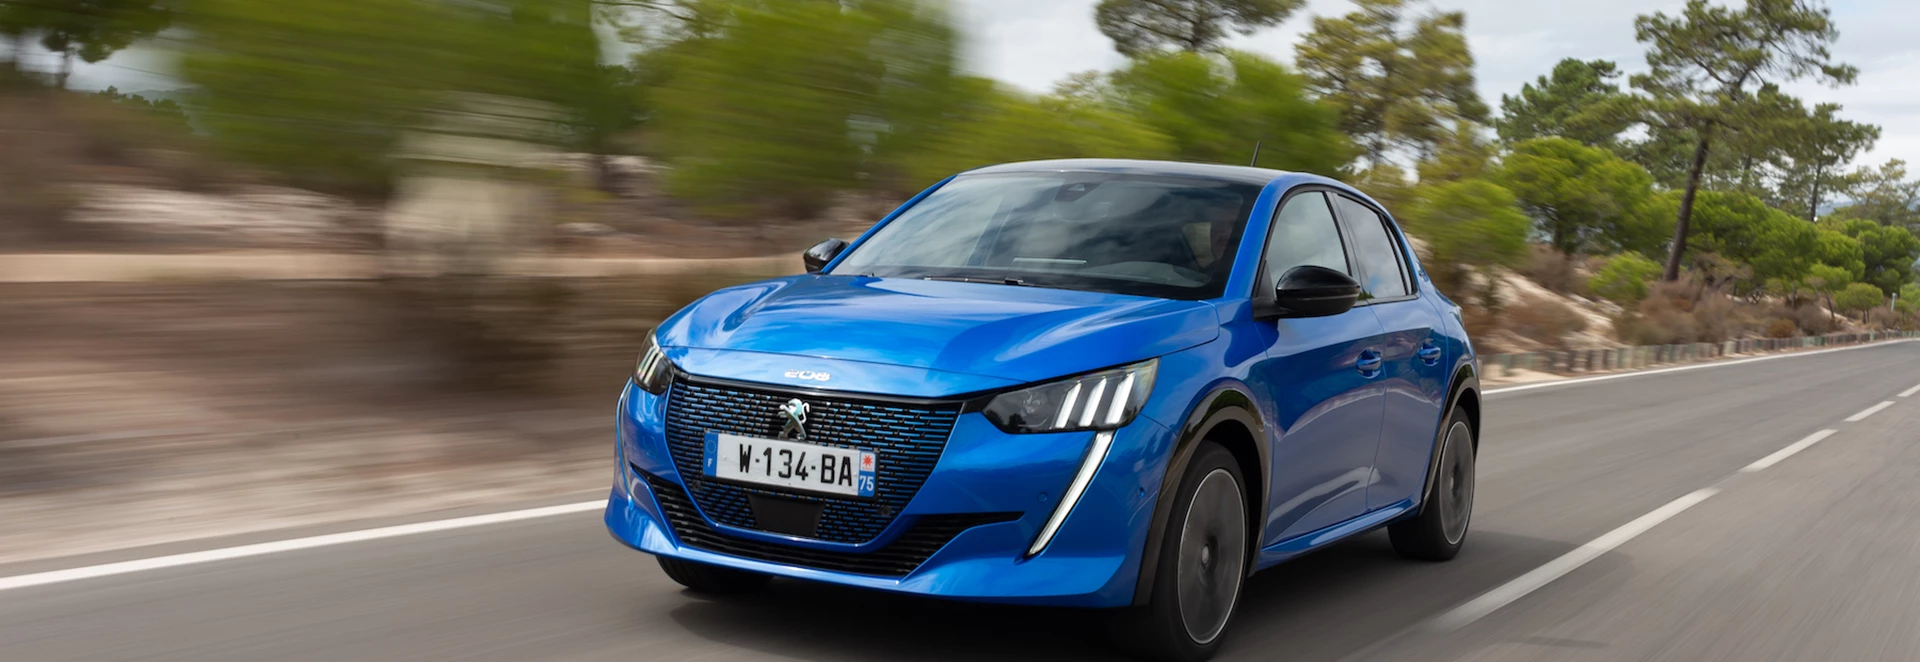 Best hybrid and electric hatchbacks to drive in 2020